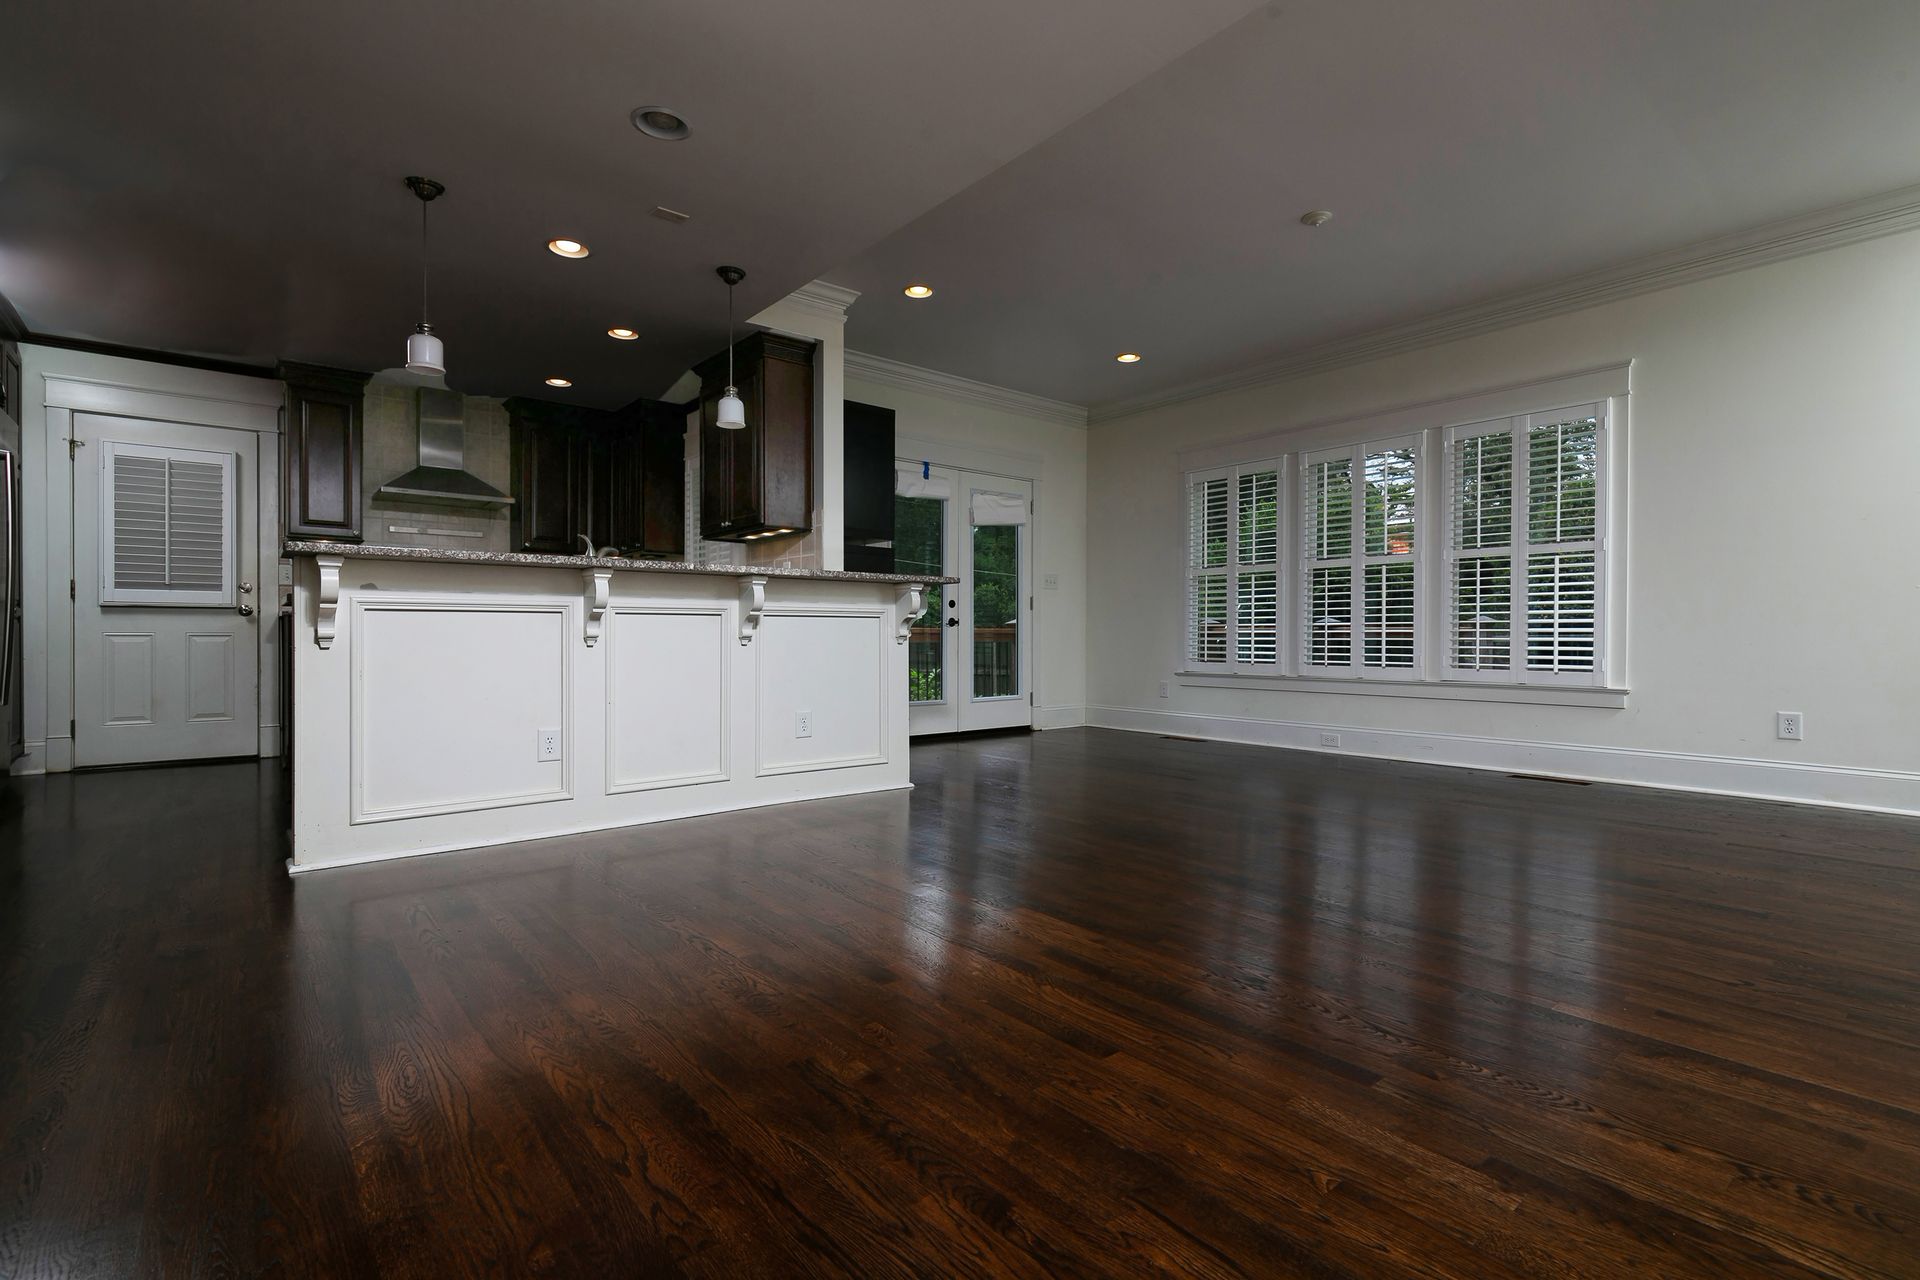 A large empty room with hardwood floors and a kitchen in the background.